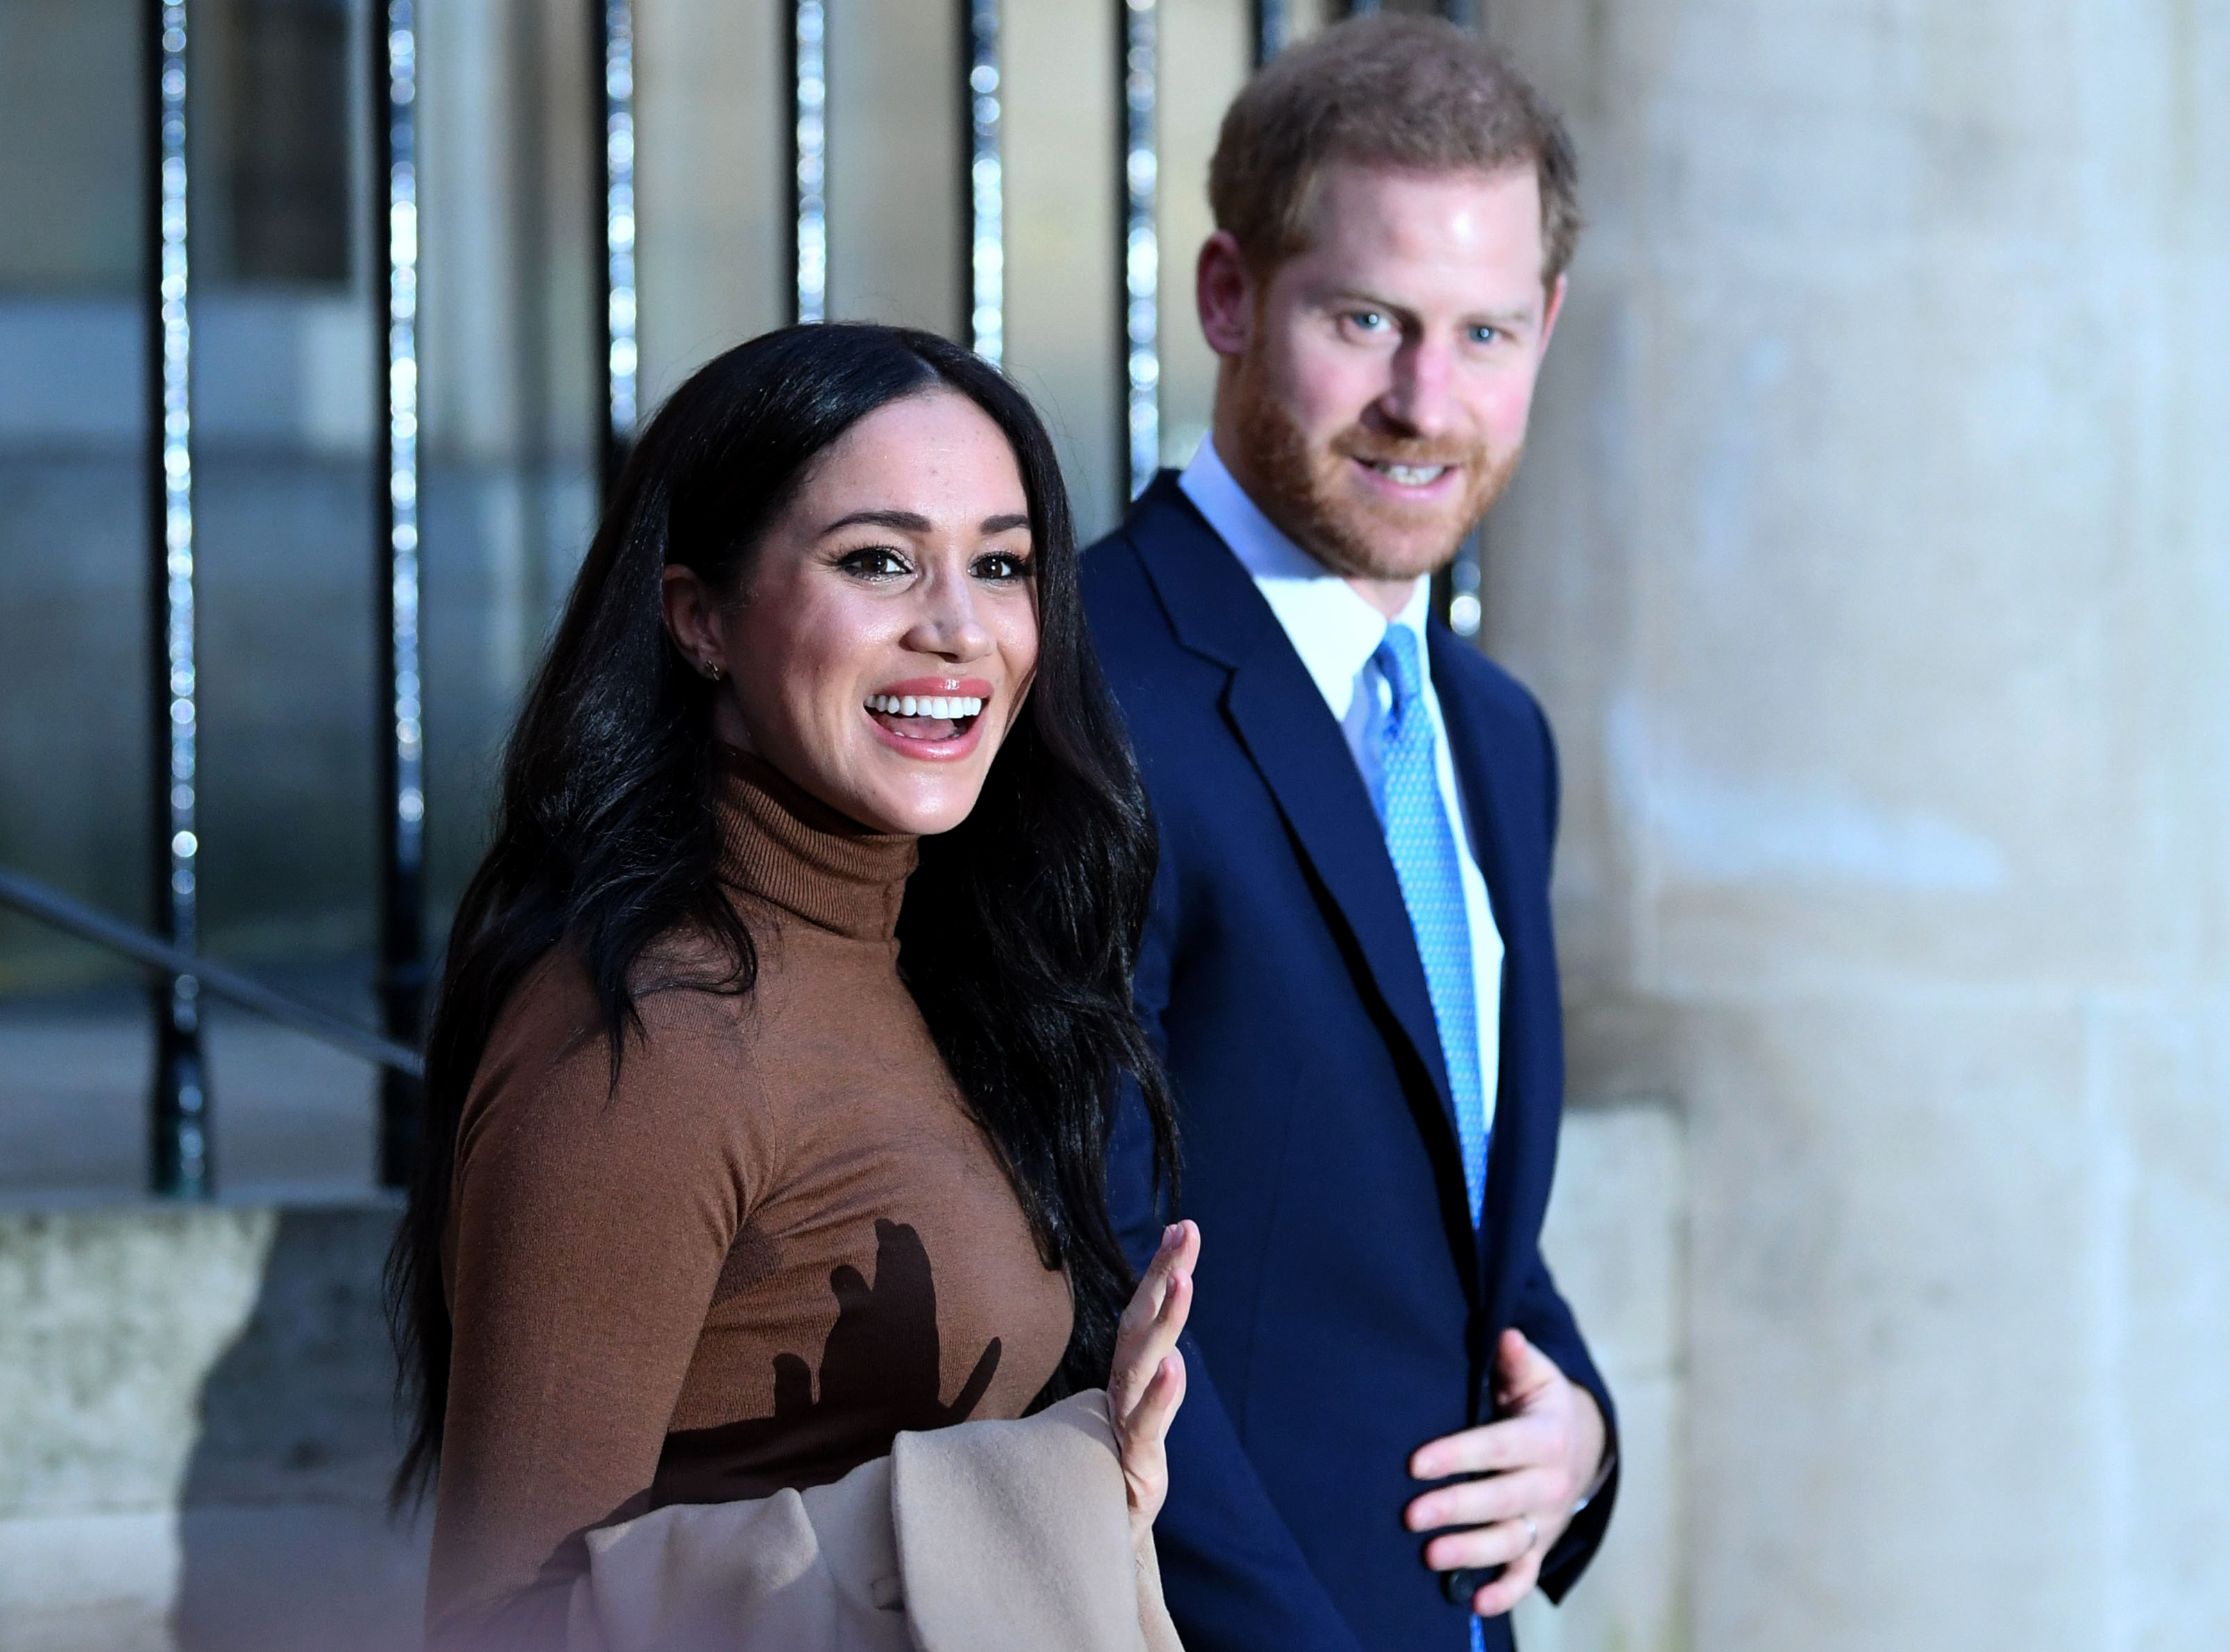 Prince Harry, Duke of Sussex and Meghan, Duchess of Sussex react after their visit to Canada House in thanks for the warm Canadian hospitality and support they received during their recent stay in Canada, on January 7, 2020 in London, England. (Photo by DANIEL LEAL-OLIVAS - WPA Pool/Getty Images)